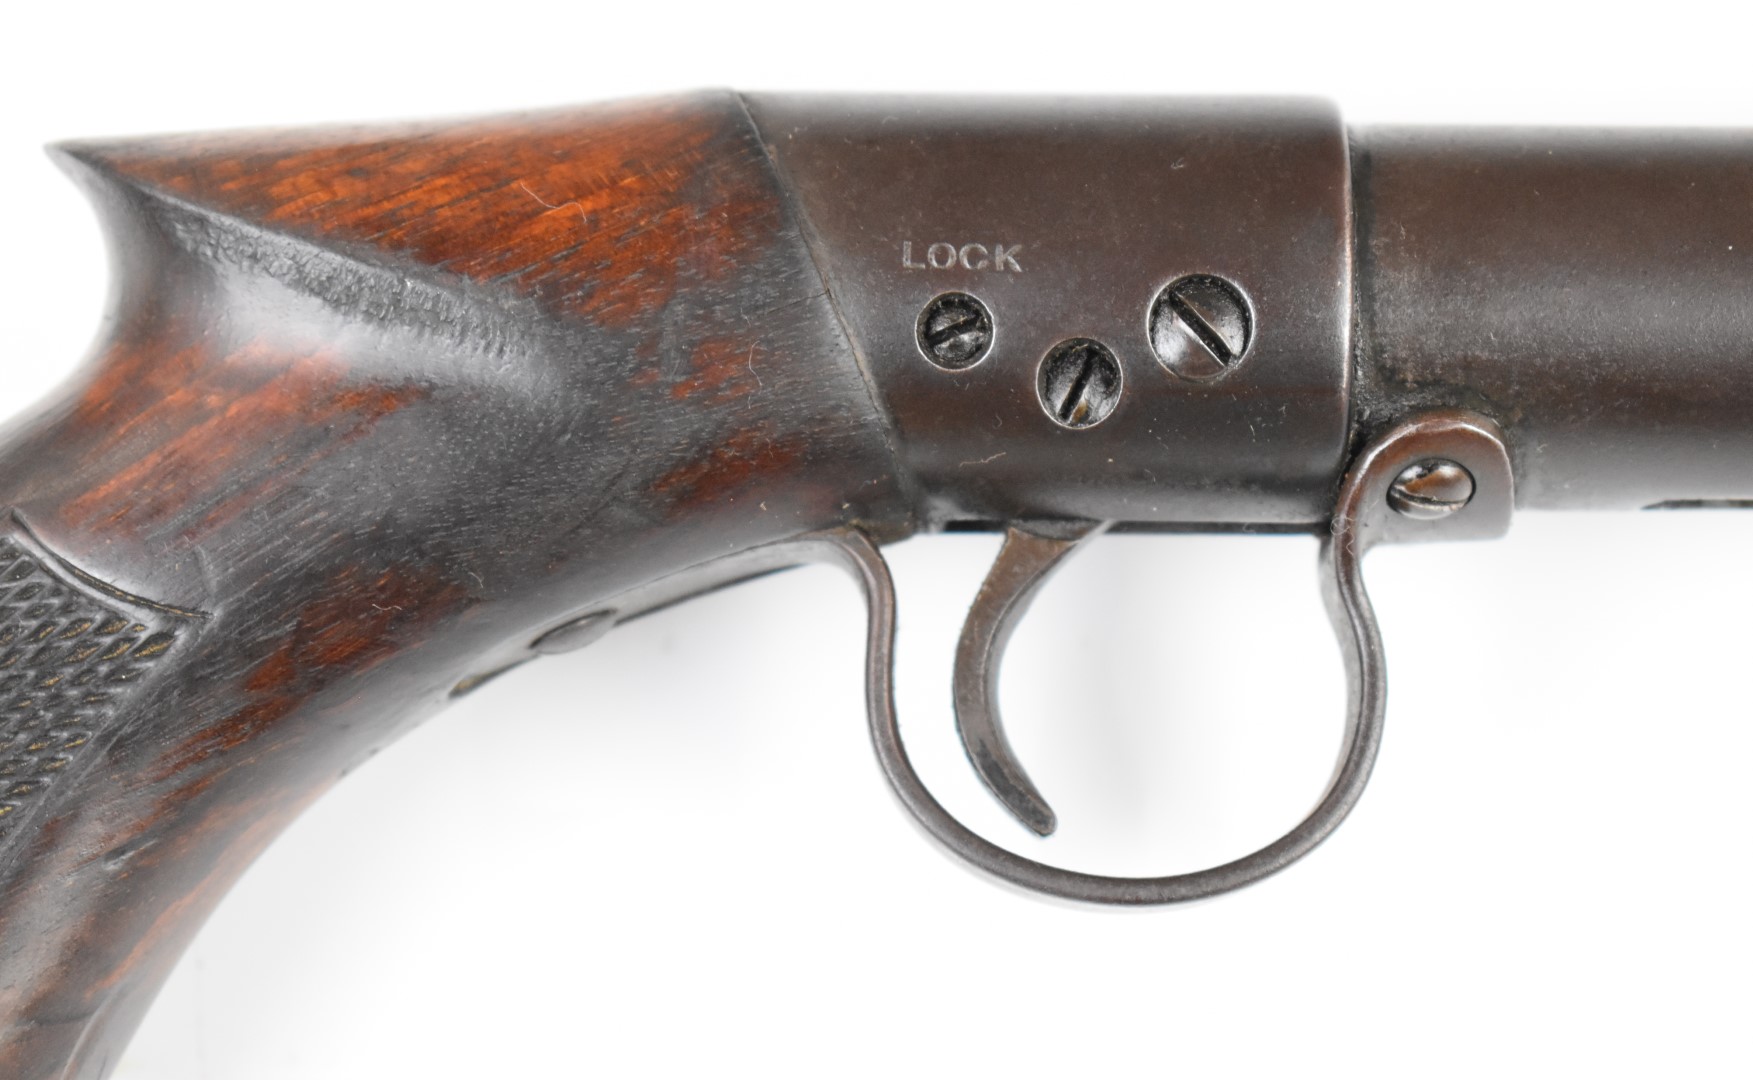 BSA Standard No 1 Light or Ladies .177 under-lever air rifle with chequered semi-pistol grip and - Image 5 of 7